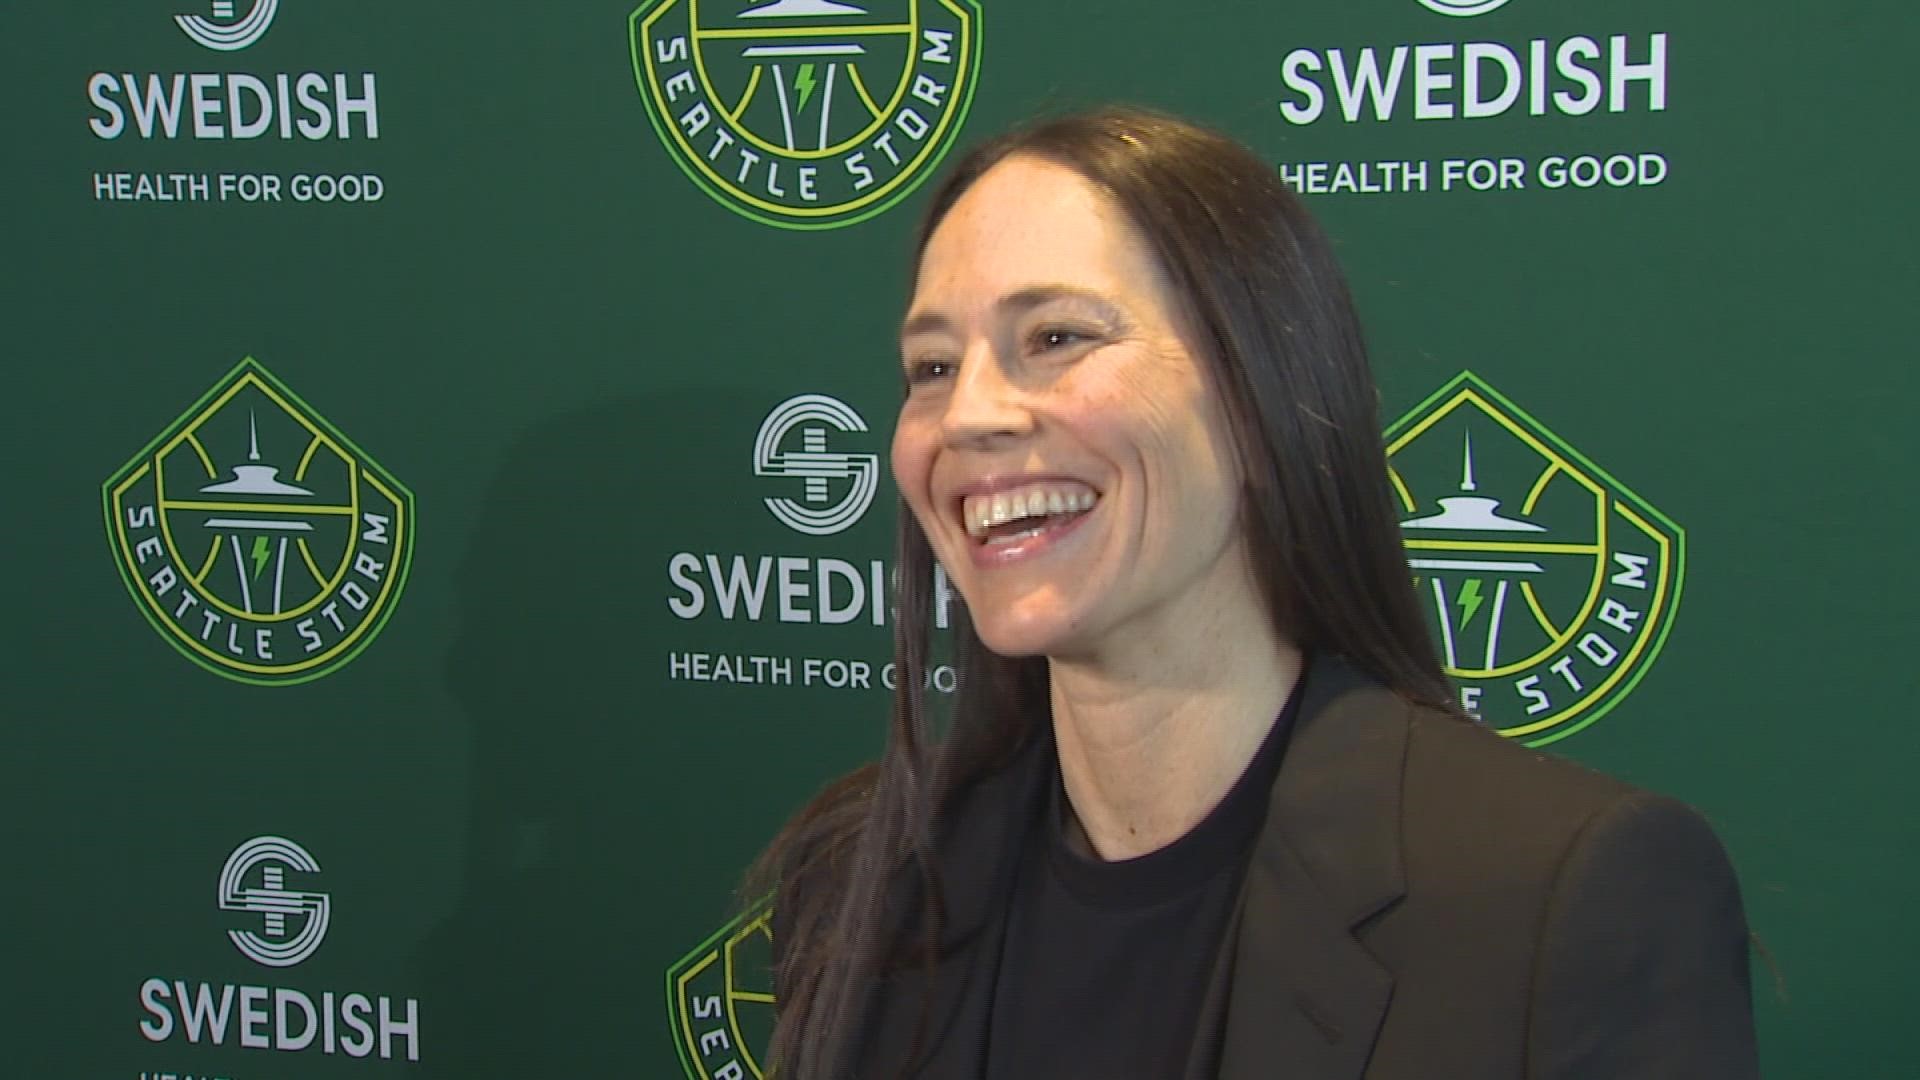 Seattle Storm's Sue Bird says all signs point toward the 2022 season being her last in the WNBA, but she does not want the upcoming season to be a farewell tour.